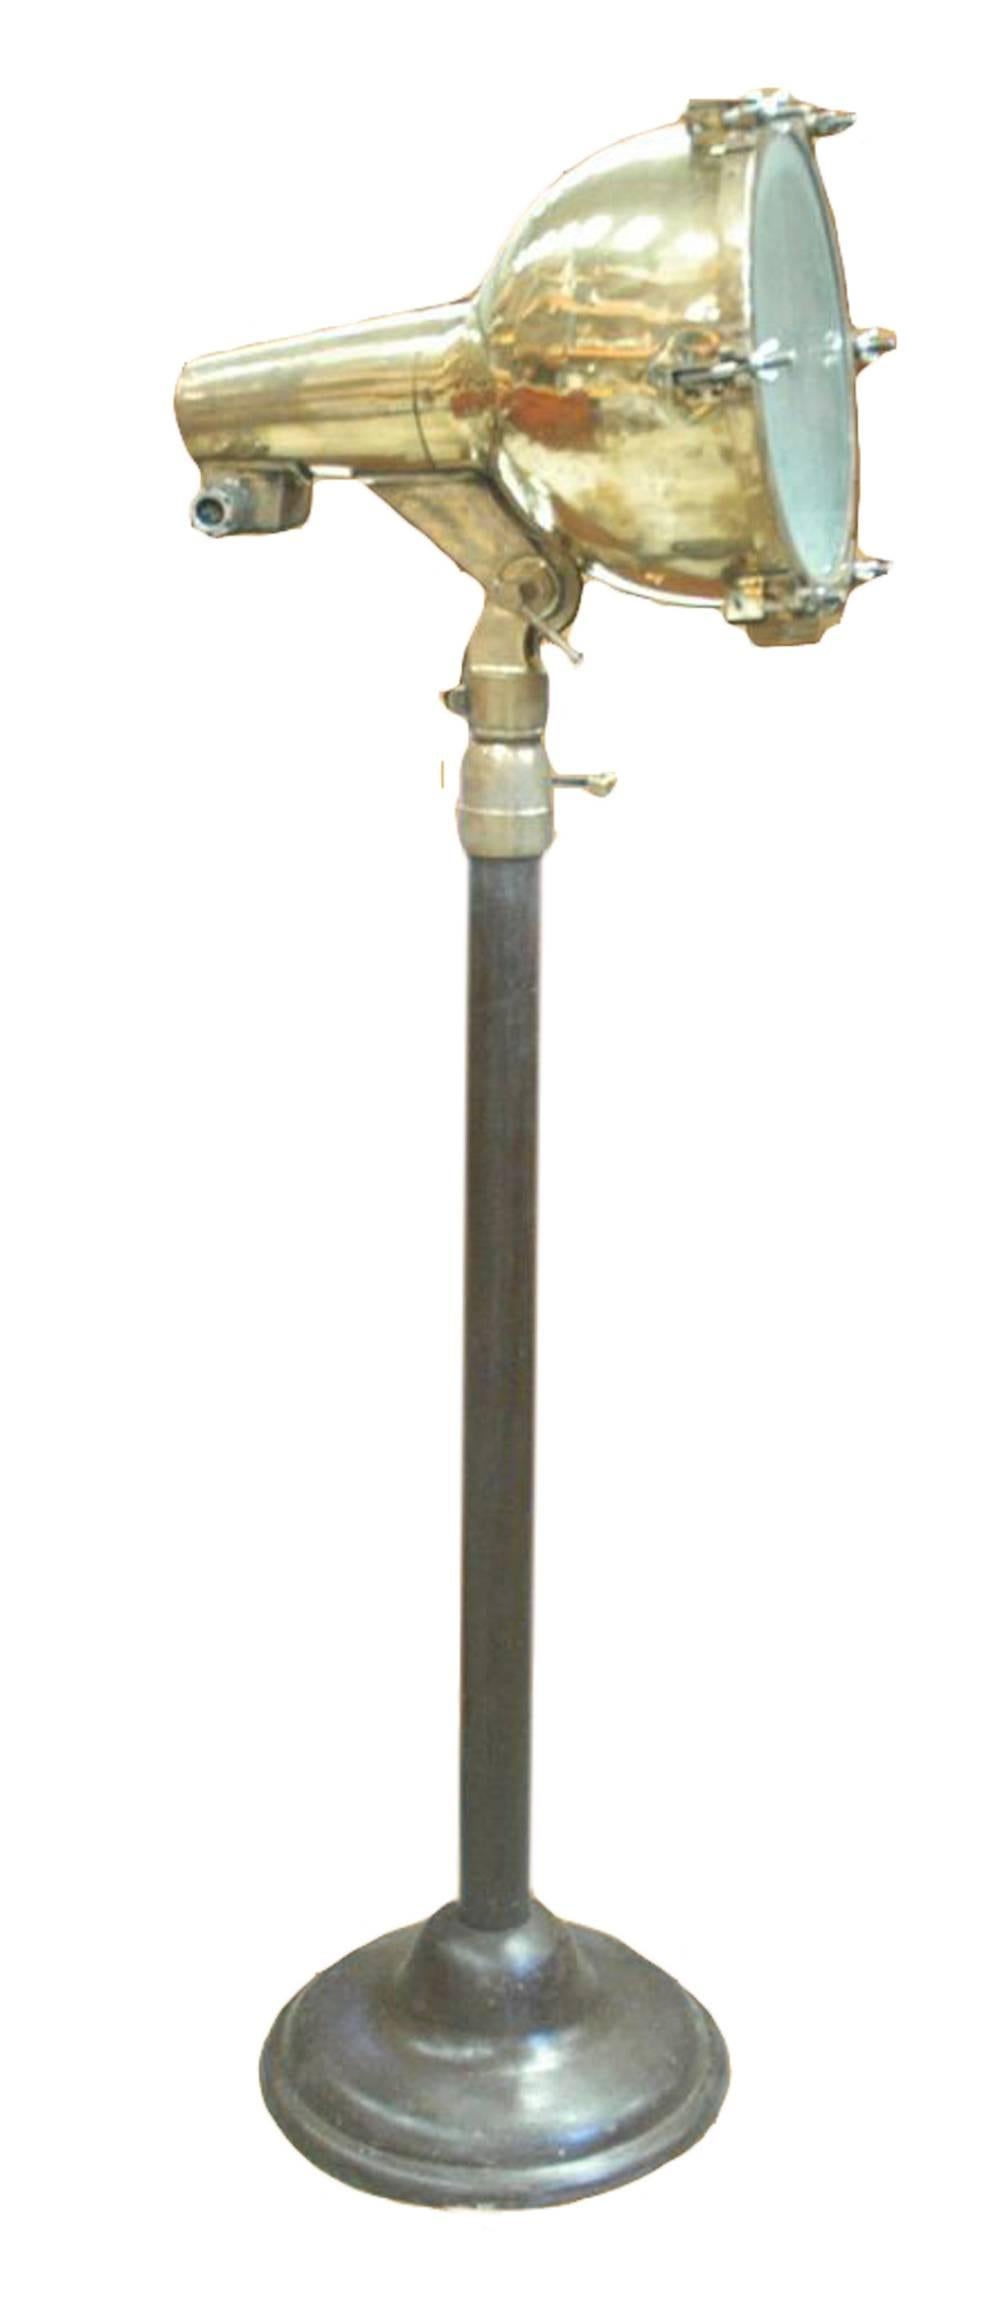 Brass ship spot mounted on an adjustable iron stand.
Measures: H 155 to 185 cm / D 34 / P 46 Base D 39 cm
See photo before polishing.